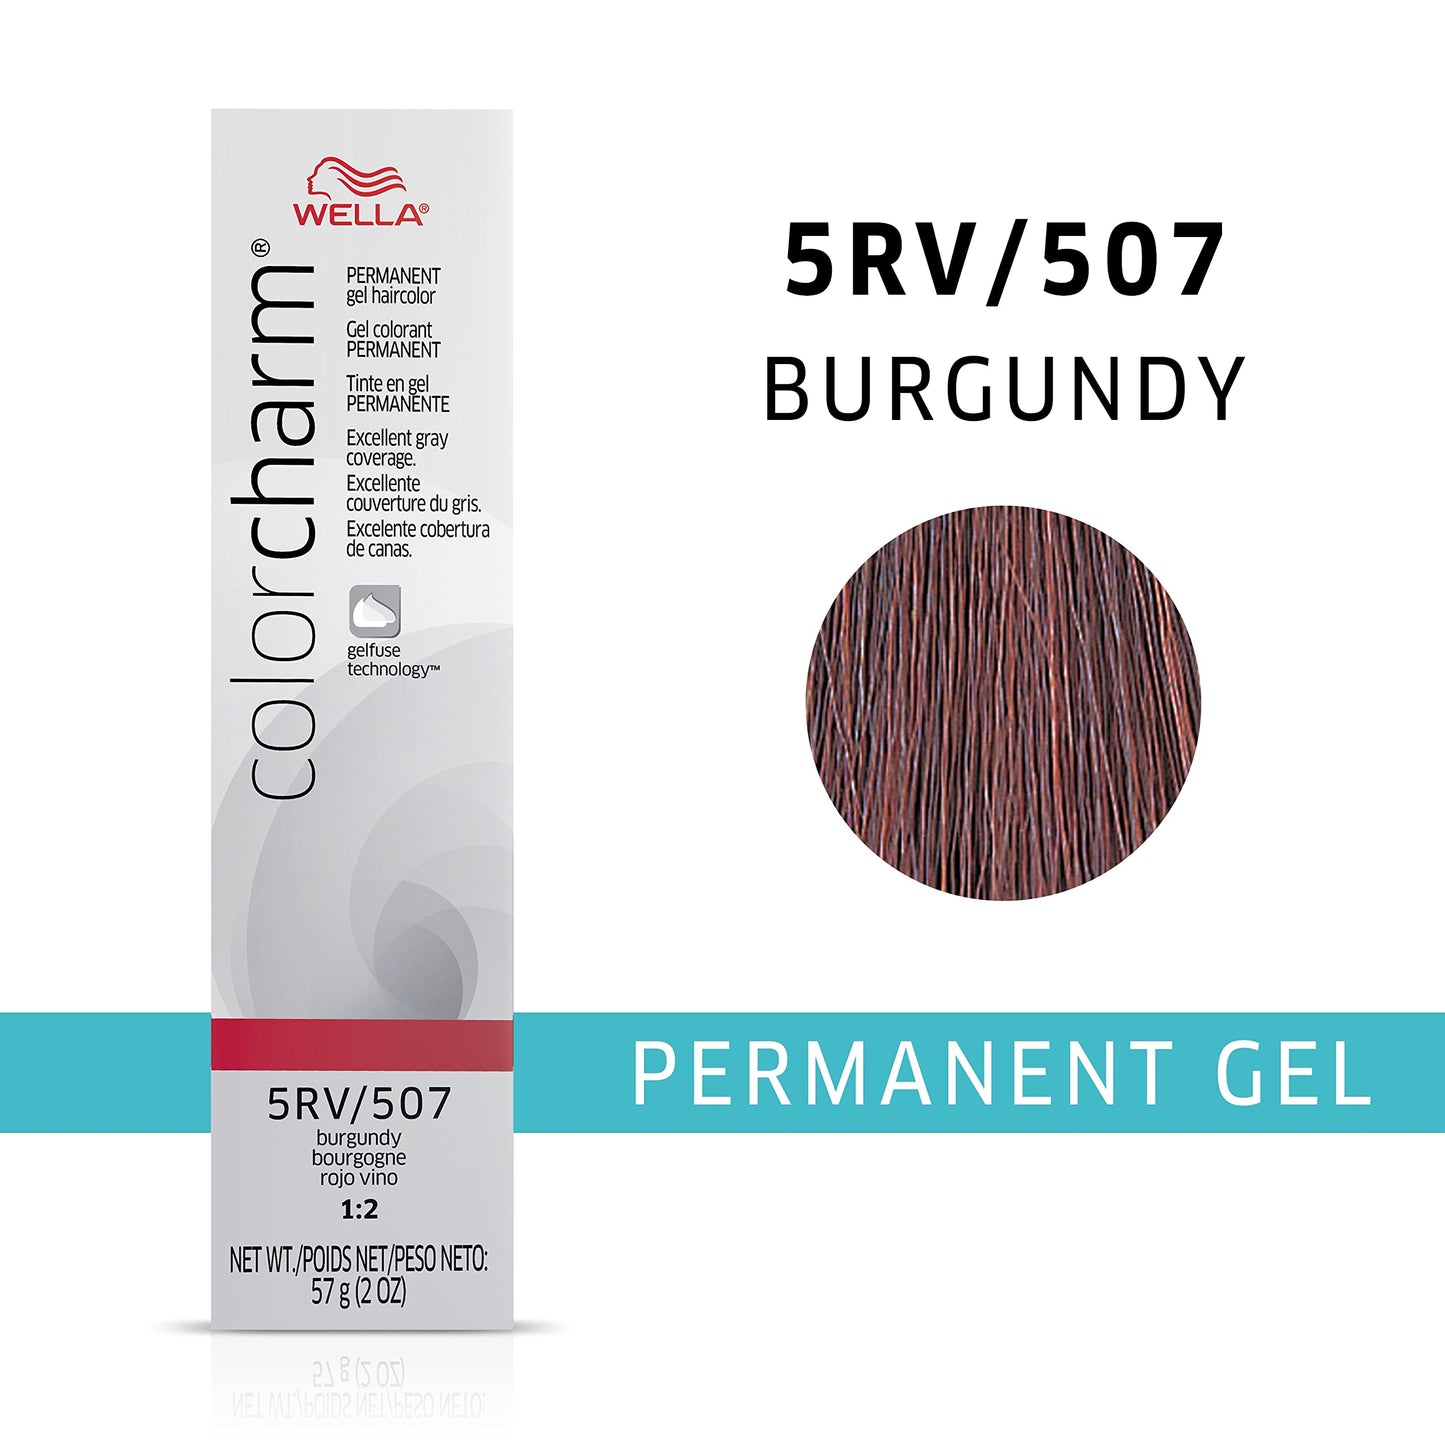 COLORCHARM Permanent Gel, Hair Color for Gray Coverage, 5RV Burgundy